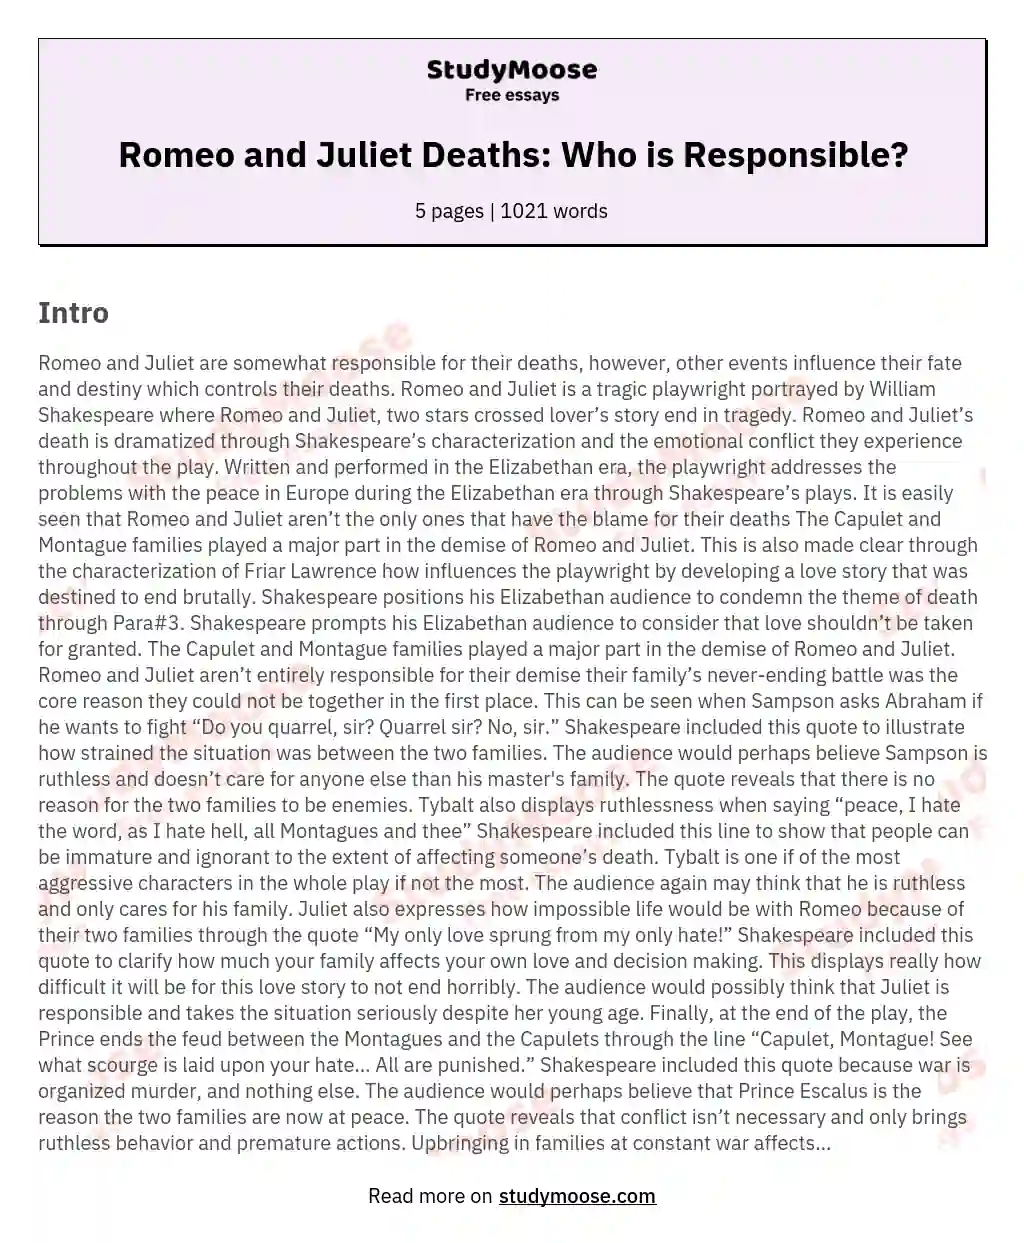 Romeo and Juliet Deaths: Who is Responsible?